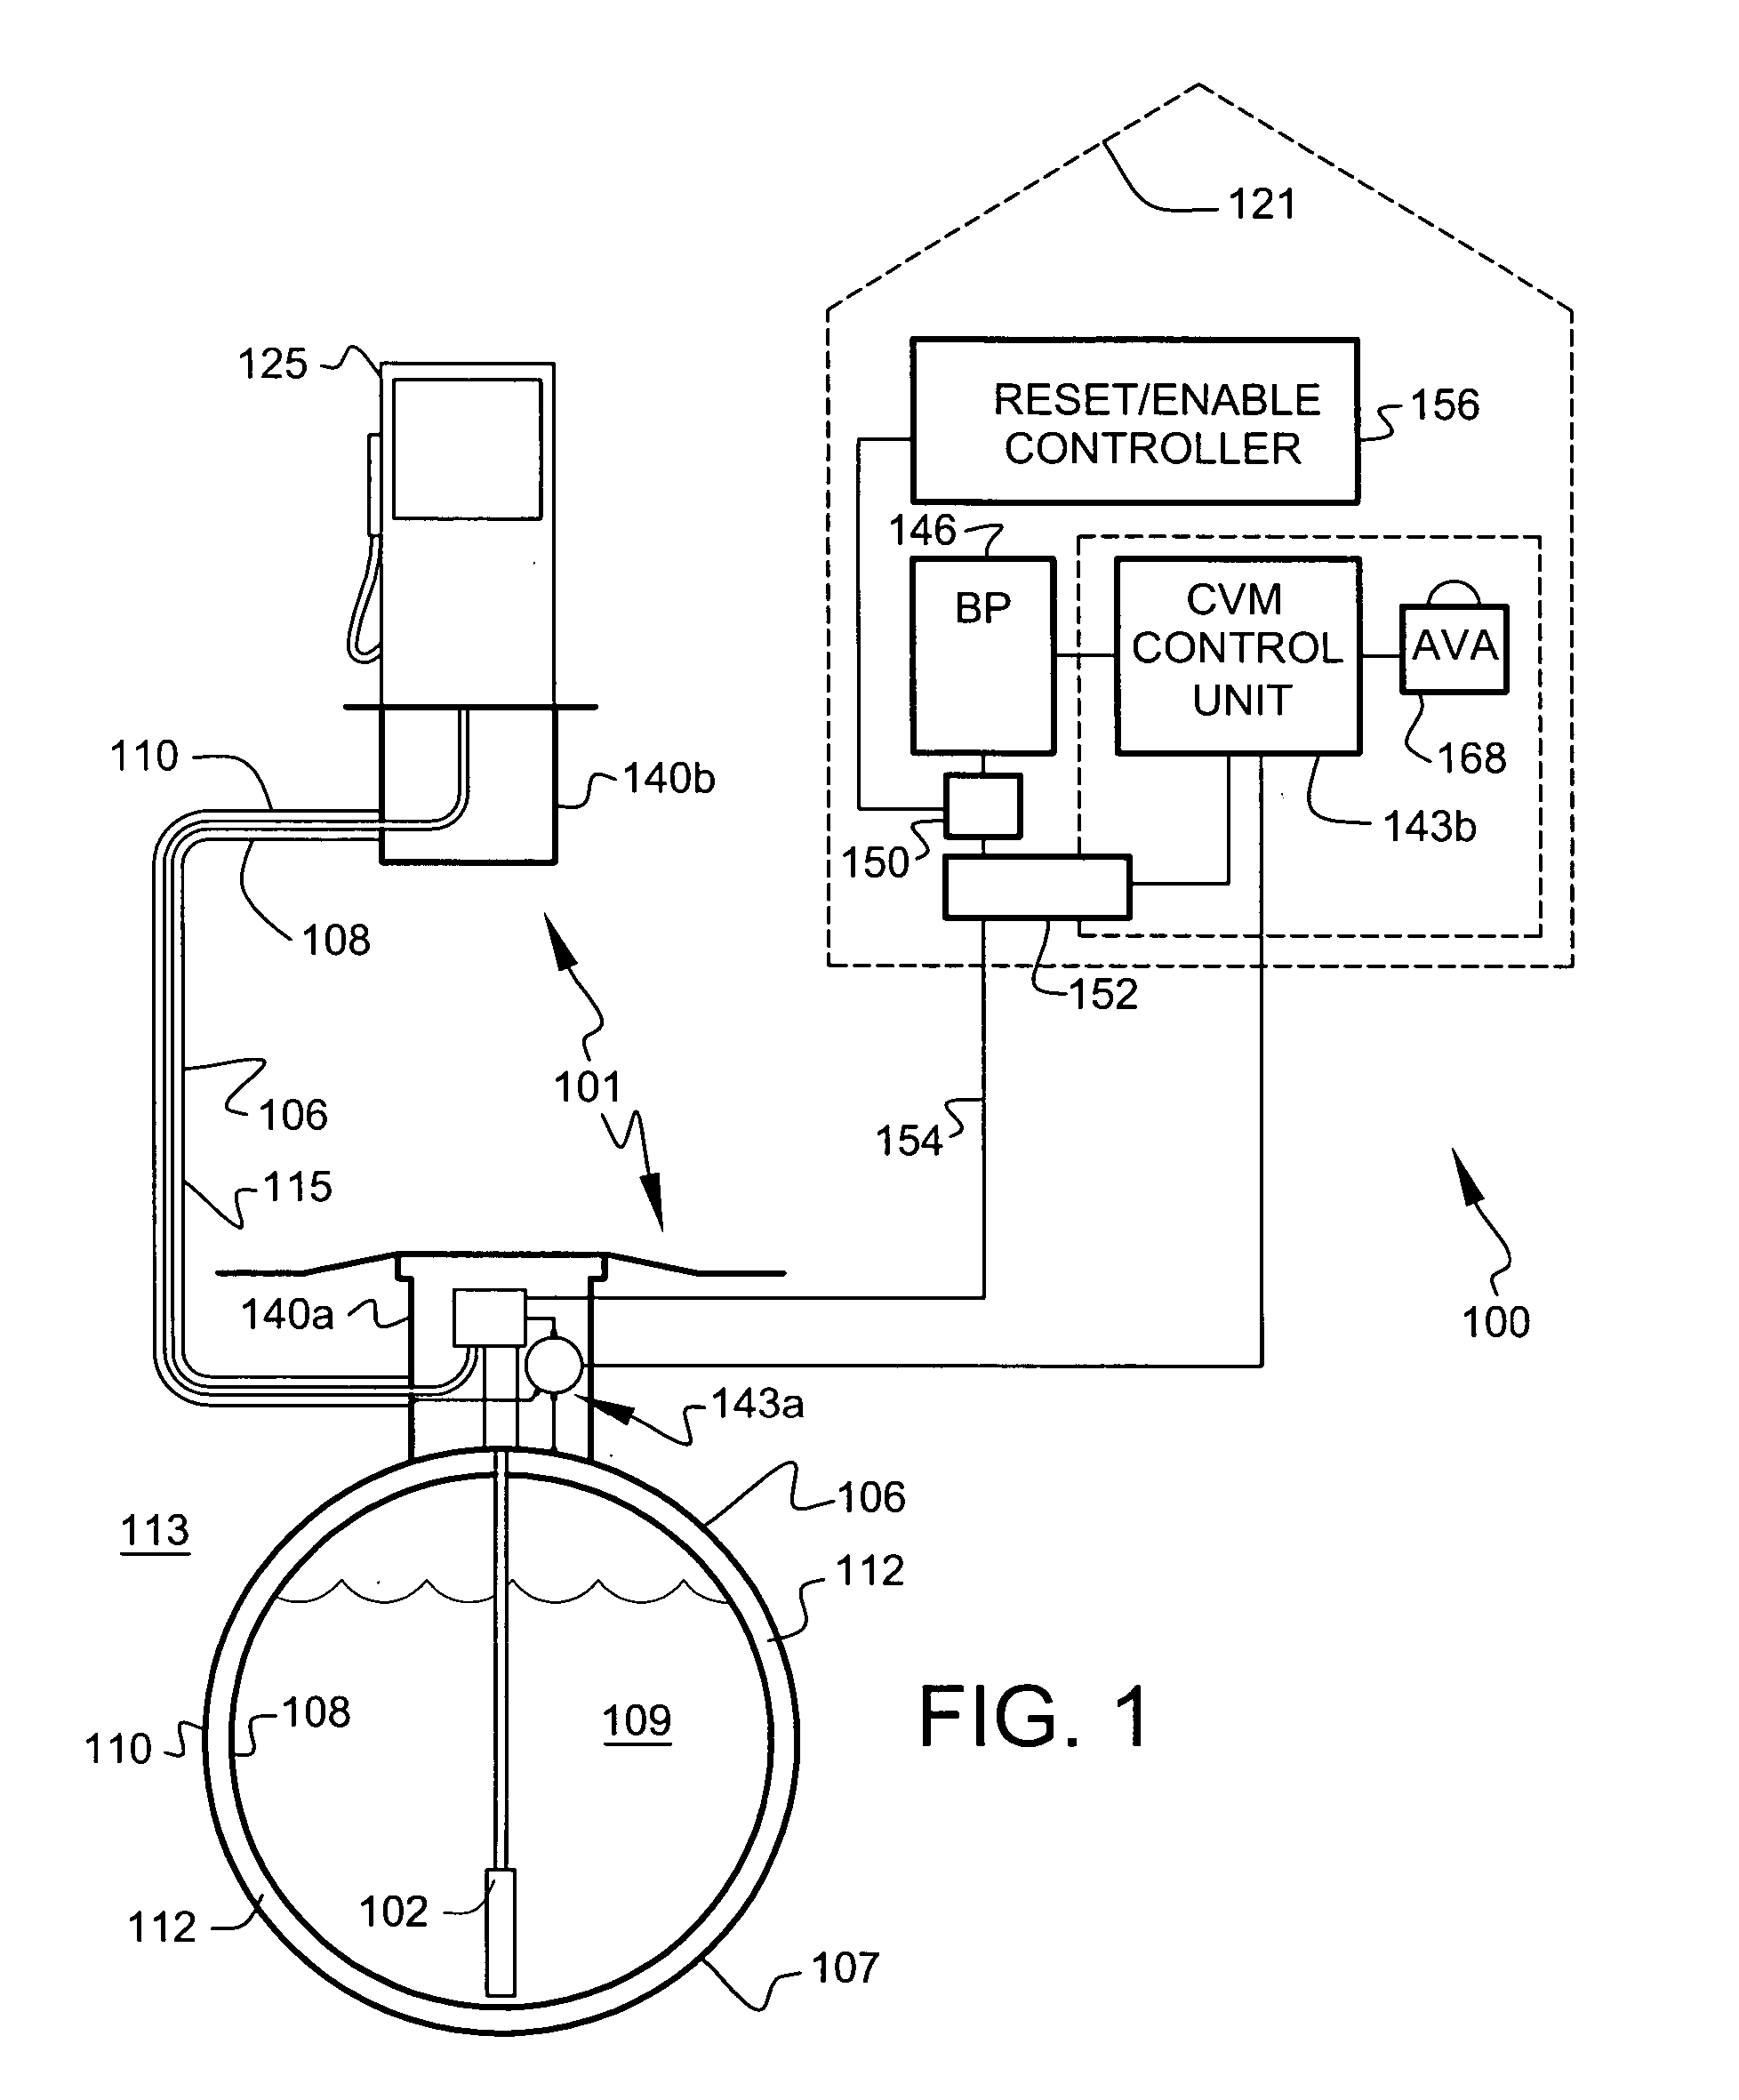 Secondary containment monitoring system